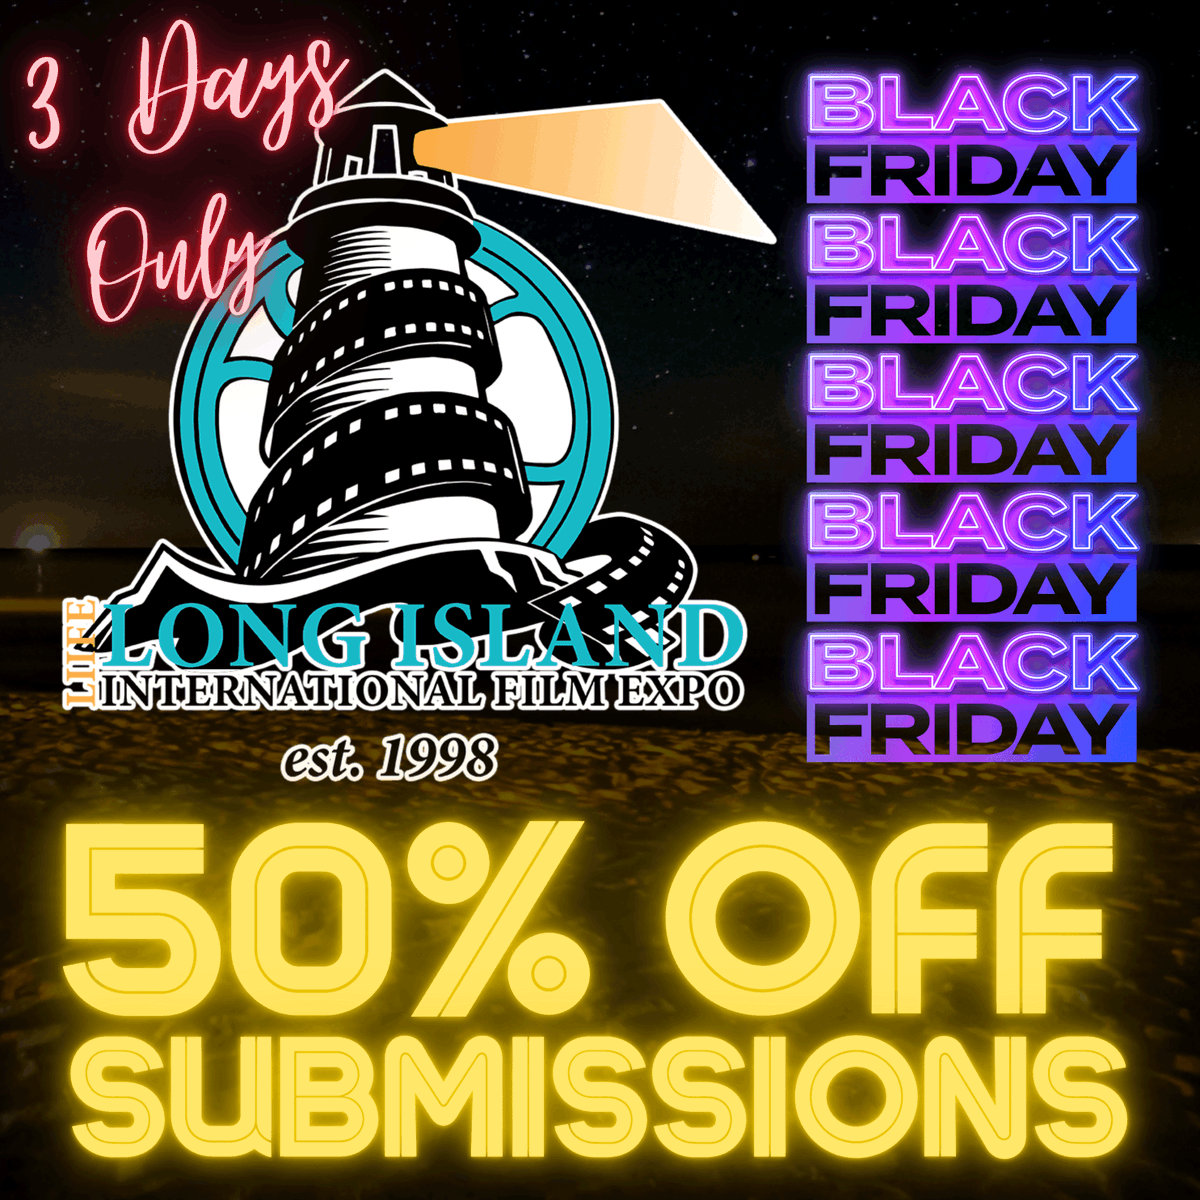 Filmmakers! Use Code LIIFE23Friday50 on @FilmFreeway for 50% off Submissions through Sunday Night! 

#BlackFriday #discount #filmmakers #longislandfilm #share #sale #filmmakinglife #liife27 #FilmTwitter